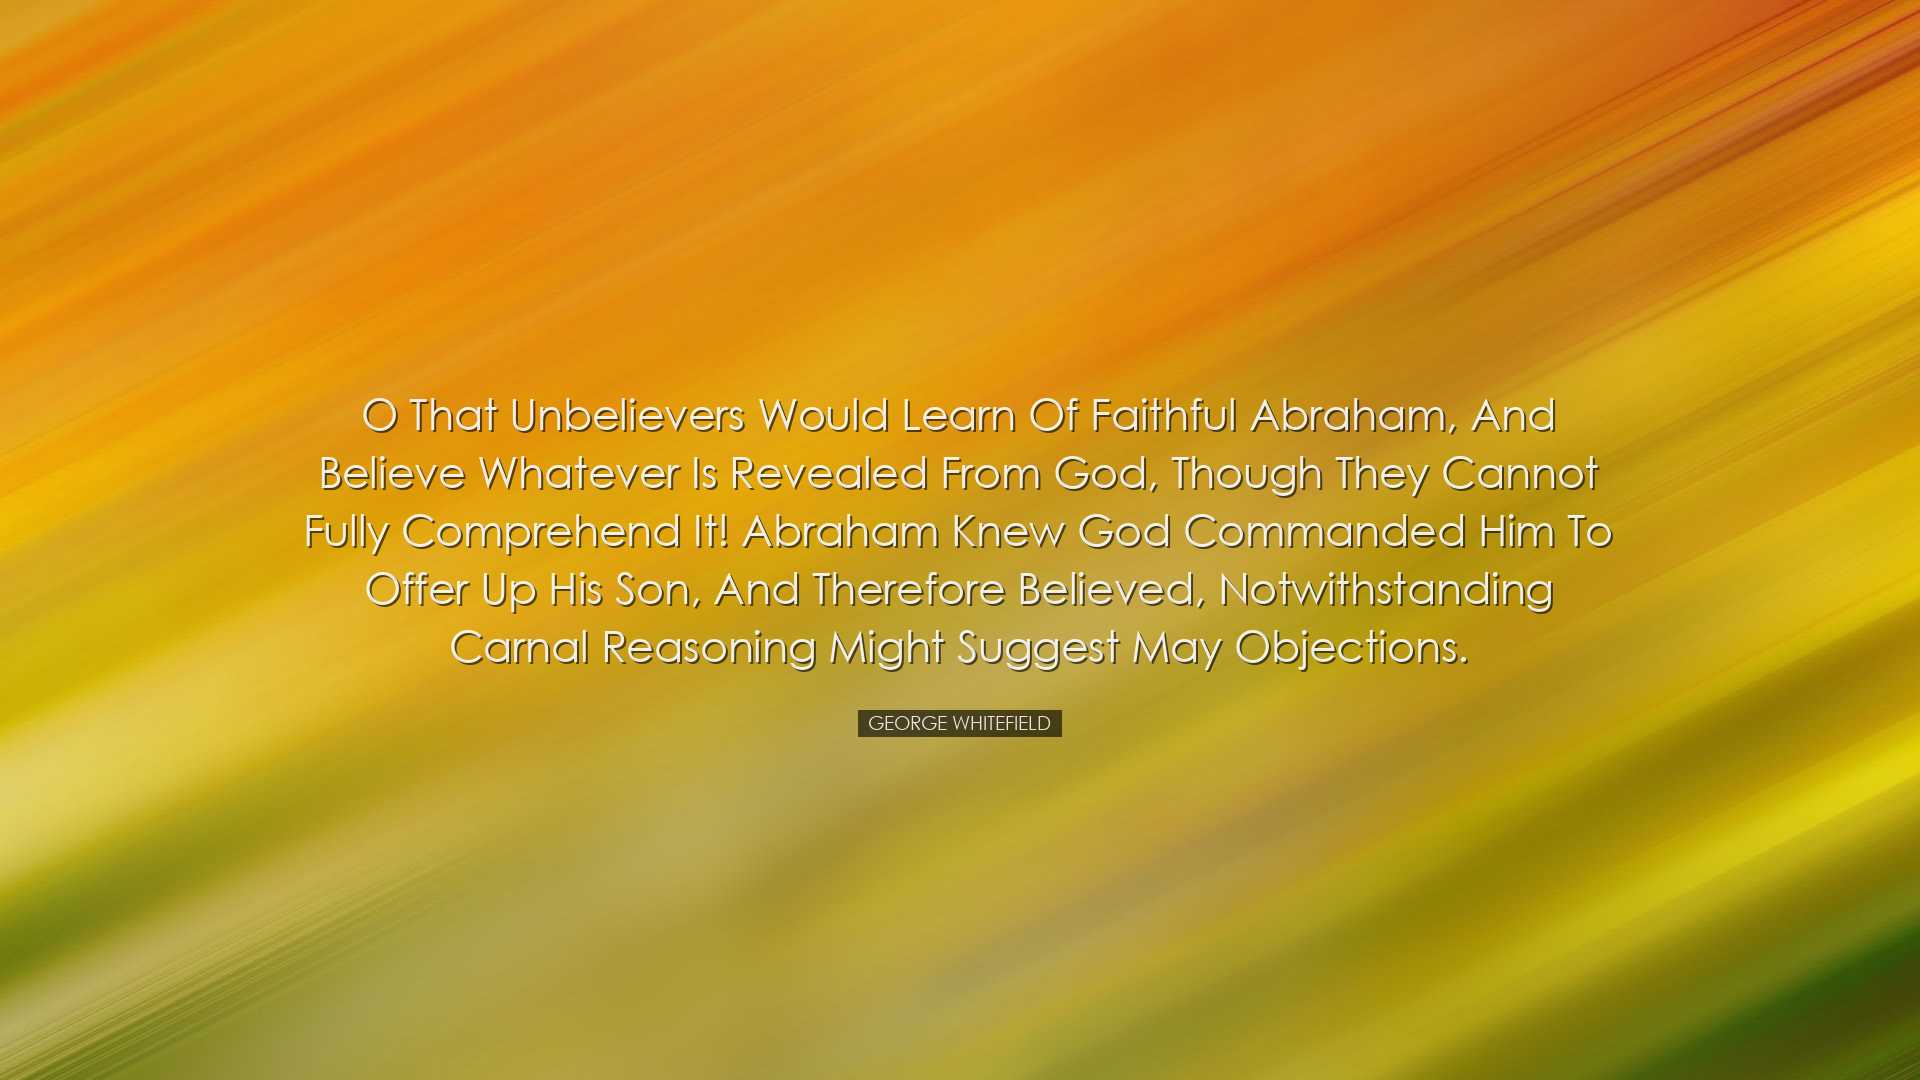 O that unbelievers would learn of faithful Abraham, and believe wh